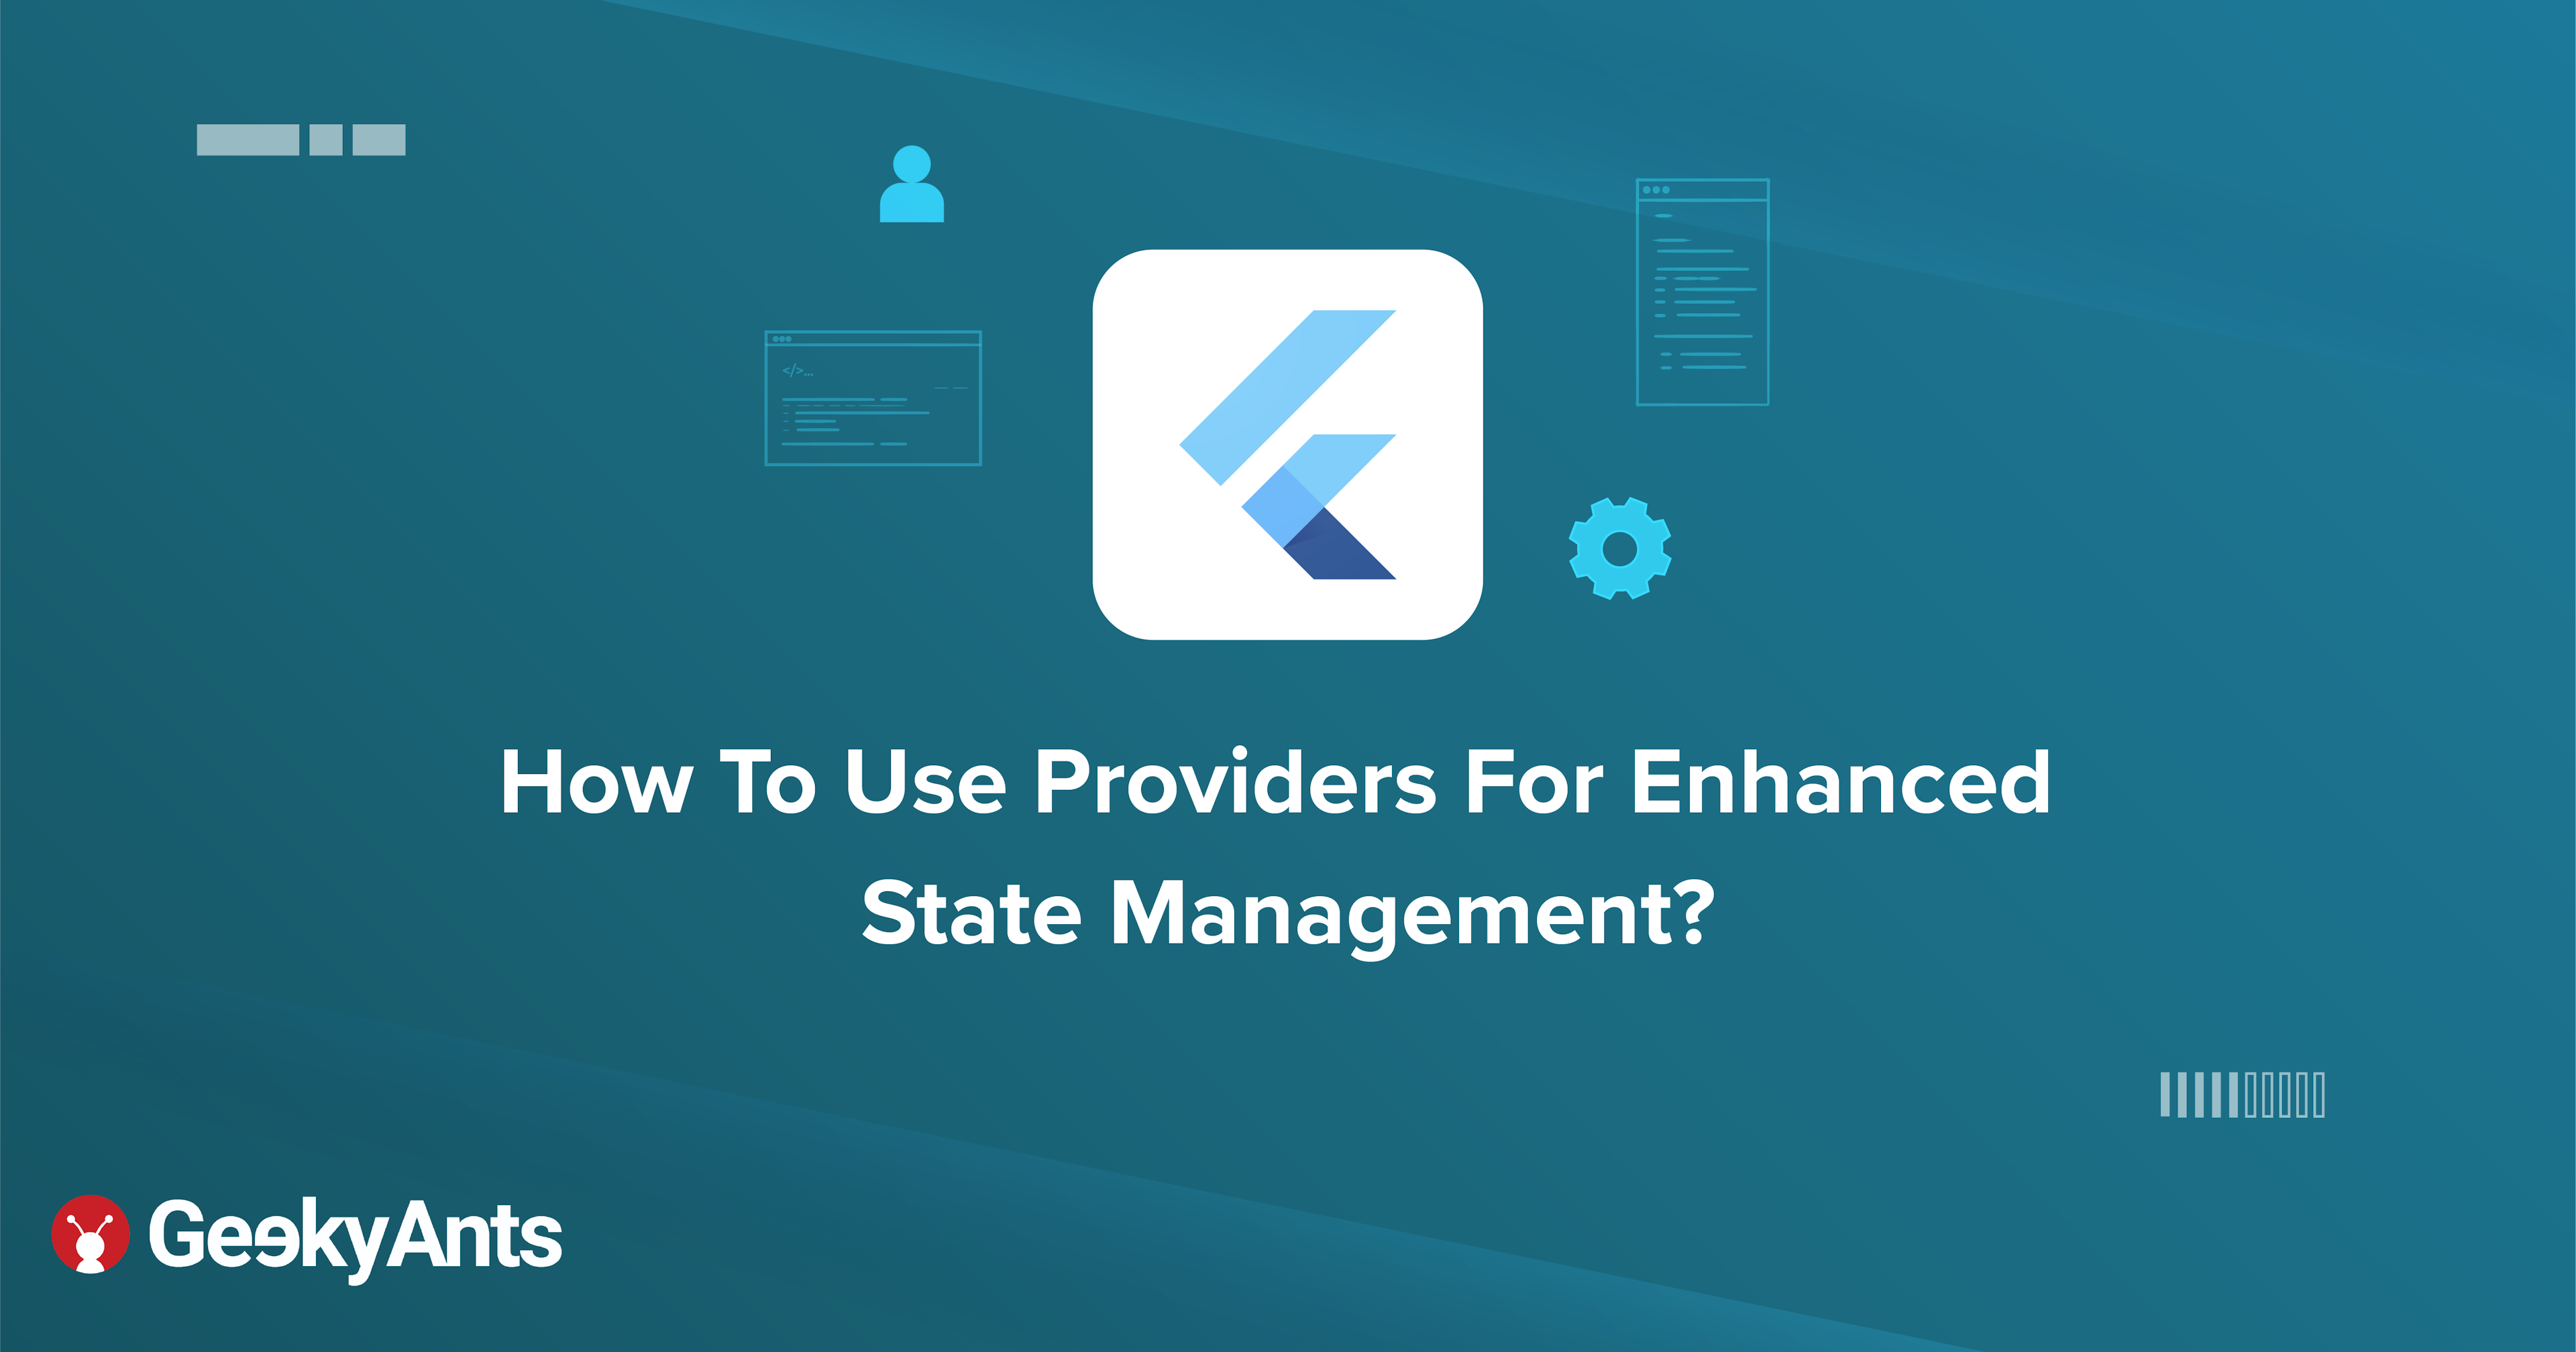 How To Use Providers For Enhanced State Management